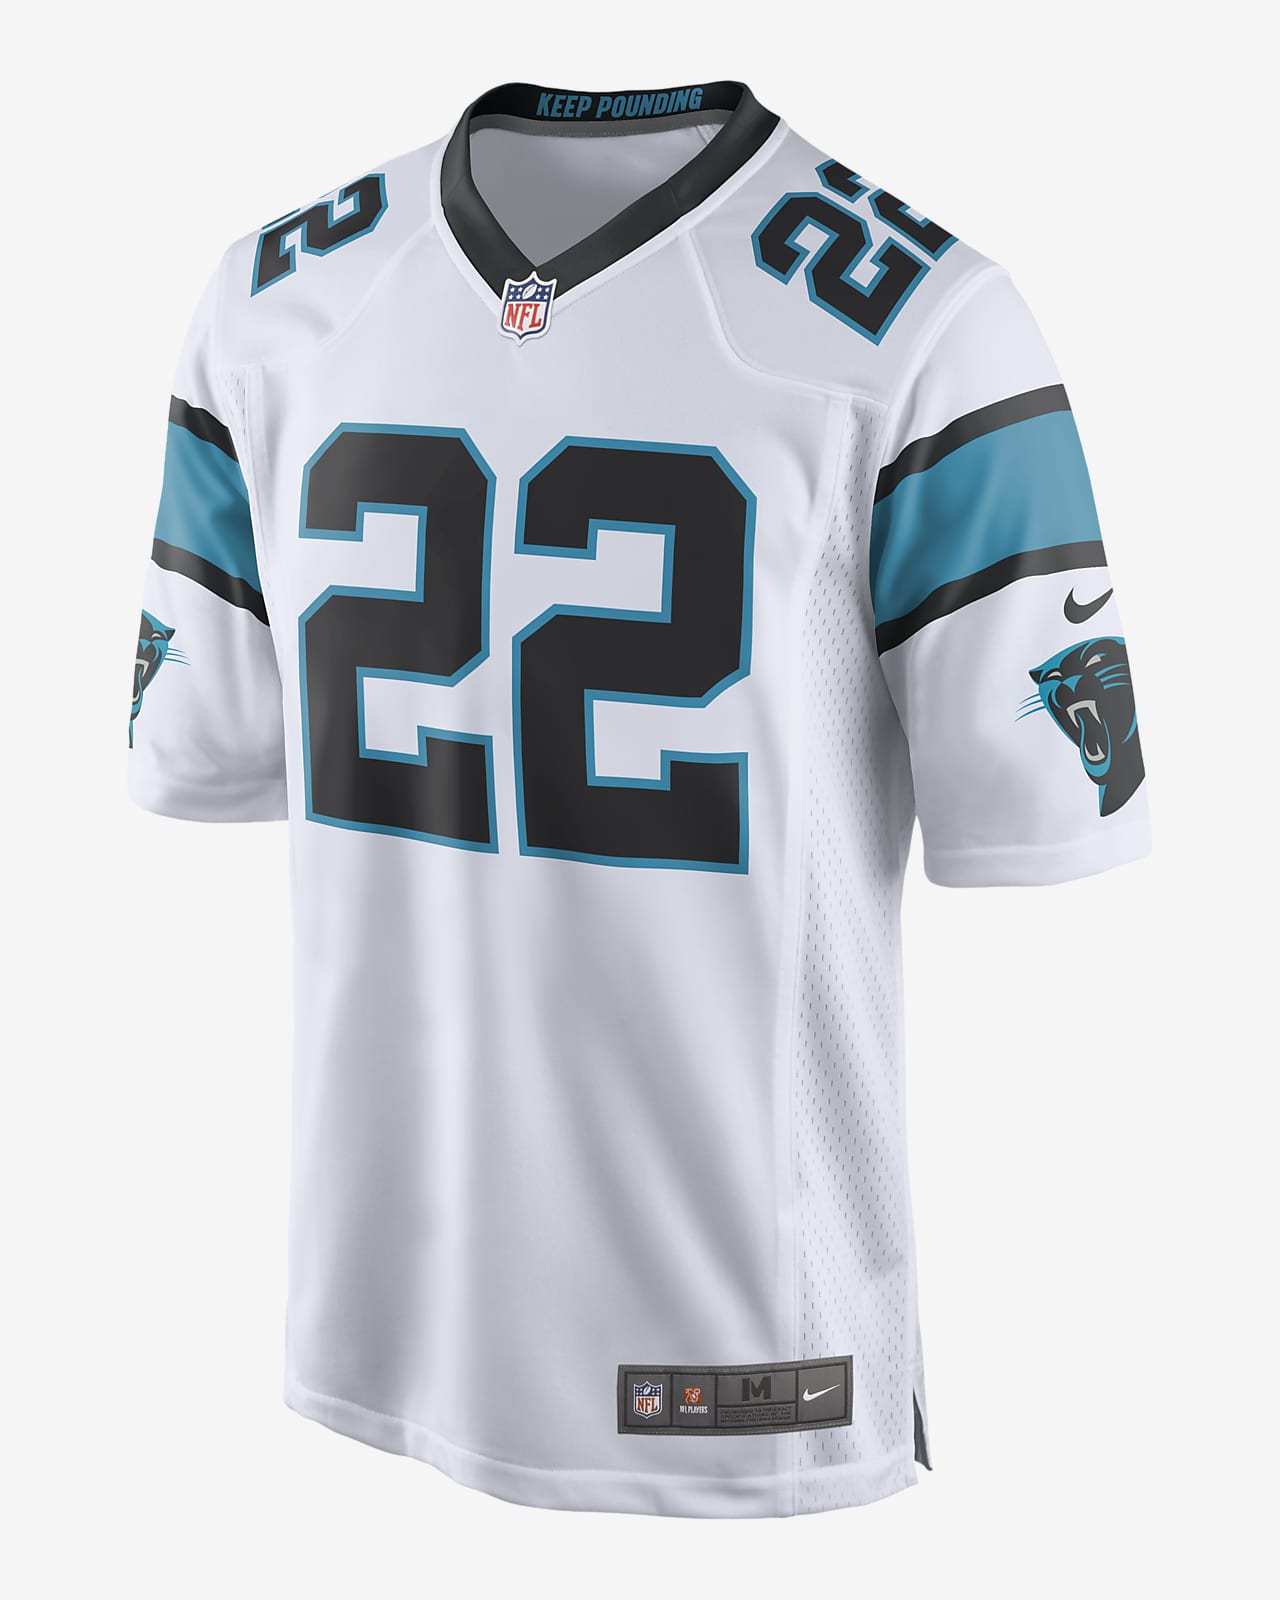 panthers jersey nfl